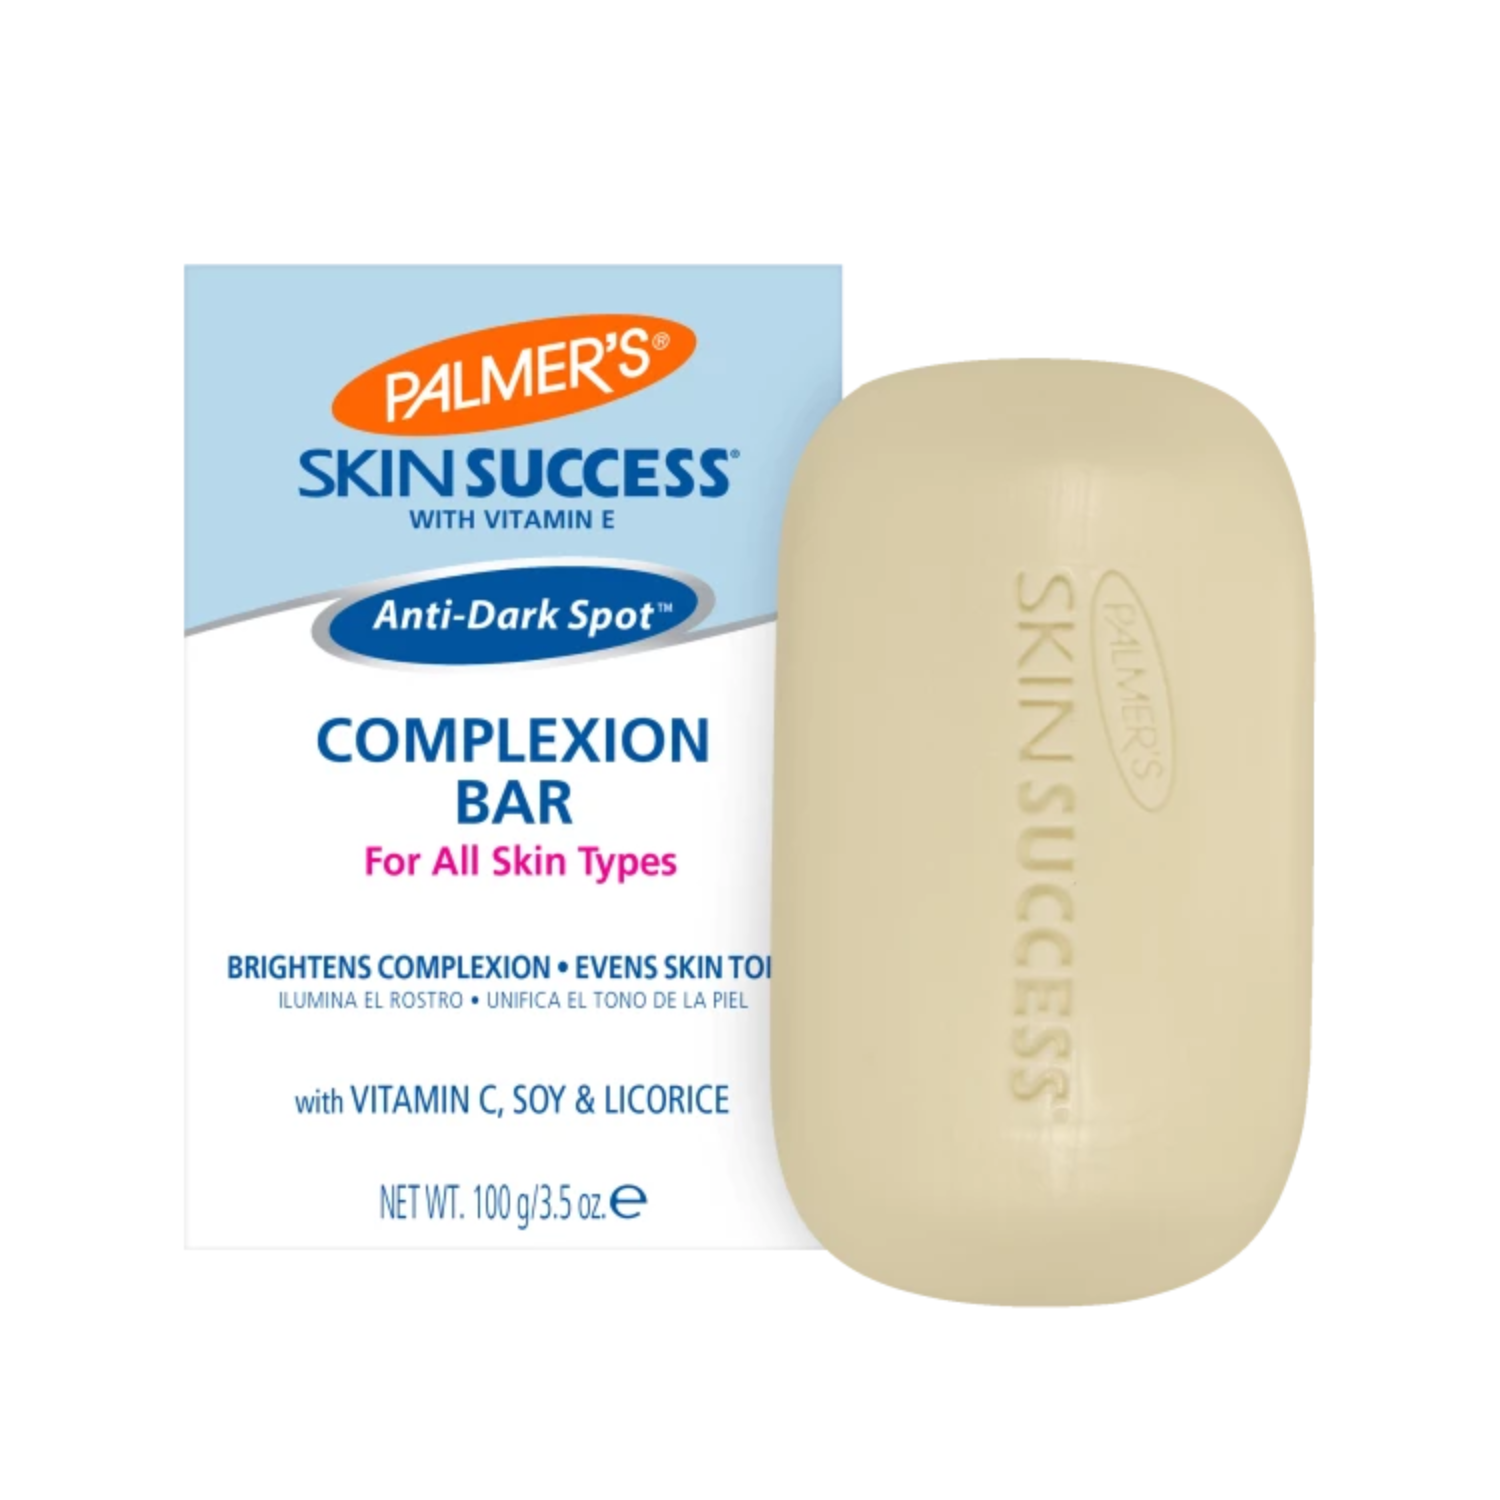 palmers-skin-success-with-vitamin-e-anti-dark-spot-complexion-bar-for-all-skin-types-usa-100g